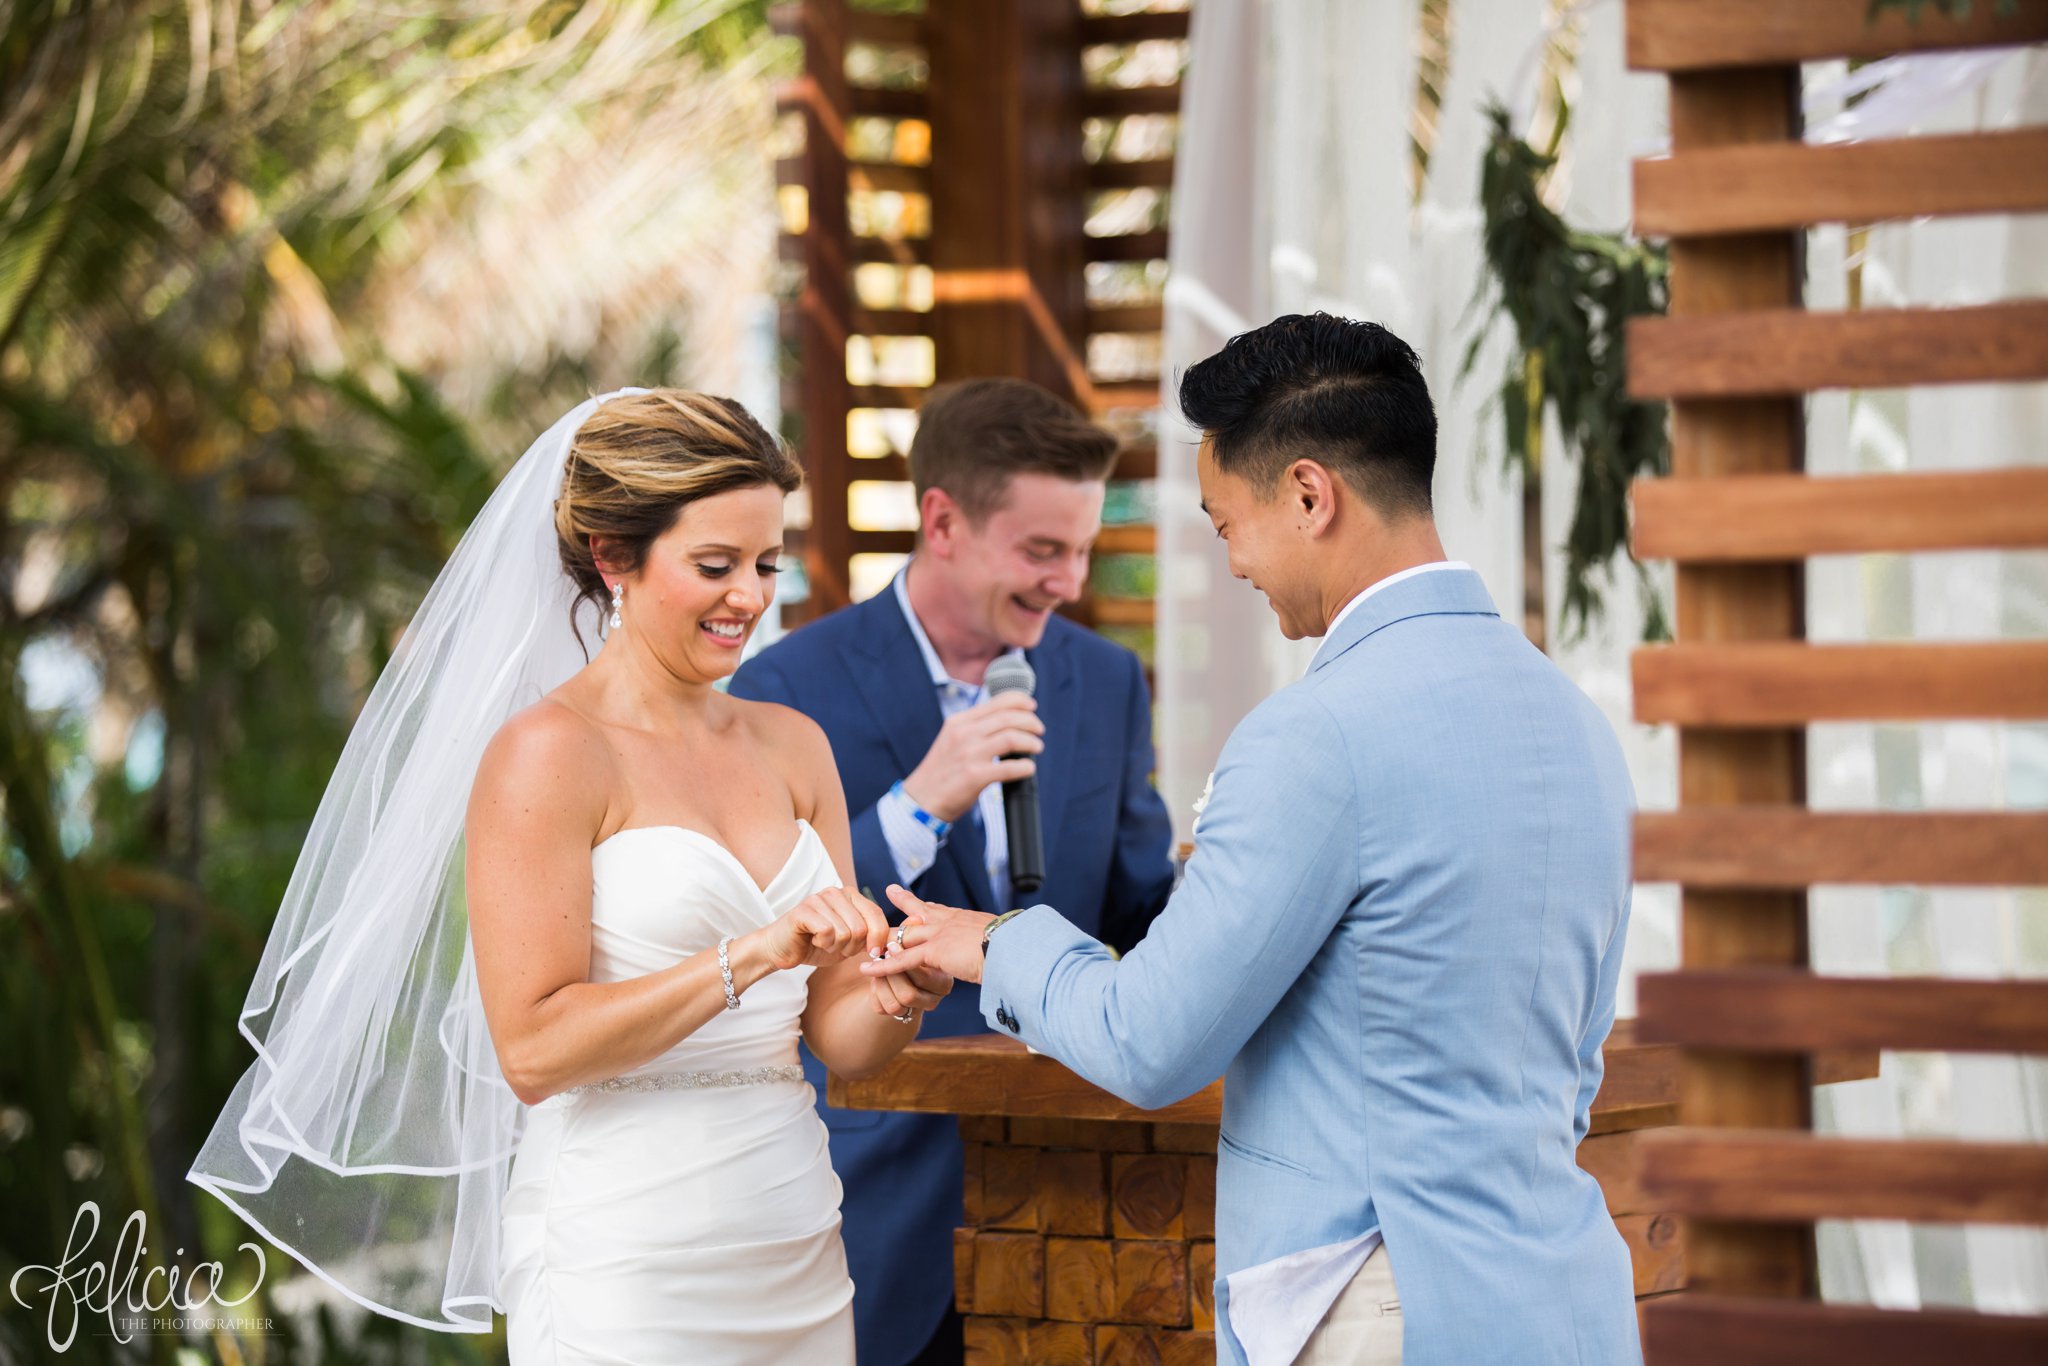 images by feliciathephotographer.com | Destination Beach Wedding | Unicco 20 87 | Photographer | L&S Travel | ceremony | stone altar | wooden gazebo | white tule | blue jacket | strapless dress | up-do veil | pastor | palm trees | ocean | laughter | joy | exchanging rings | saying vows 